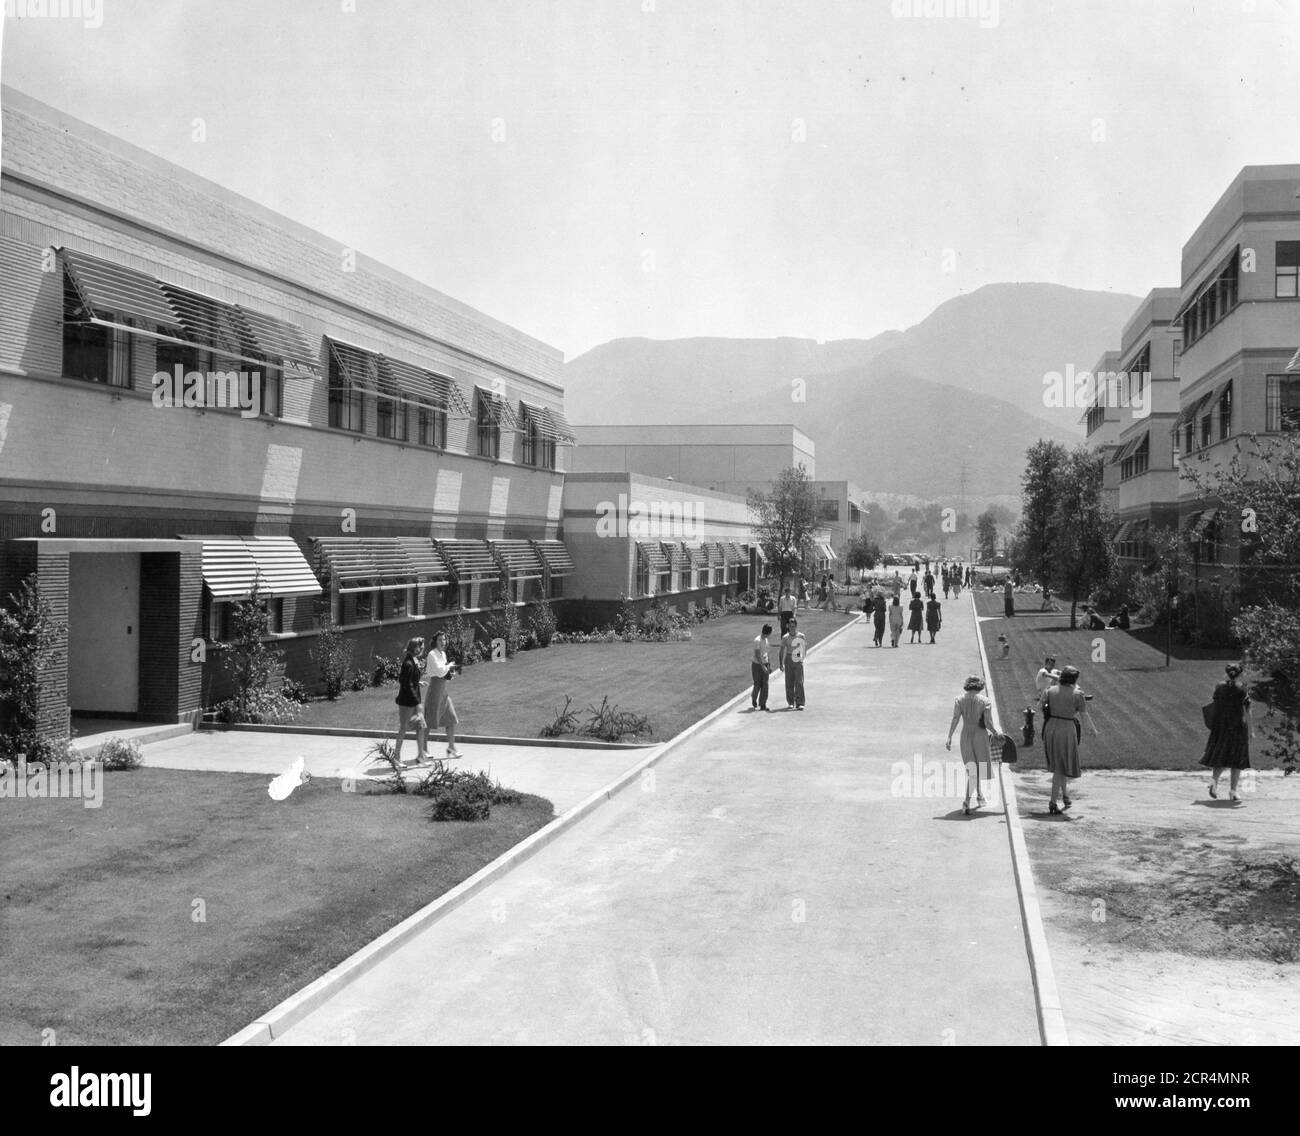 Photo looking down Disney Studios' Minnie Mouse Boulevard with several wings of the Animation Building shown on the right, the Inking and Painting, Production Camera and Cutting departments on the left and Publicity and Live-Action Buildings in the background, Burbank, CA 1943. (Photo by Office of War Information/RBM Vintage Images) Stock Photo